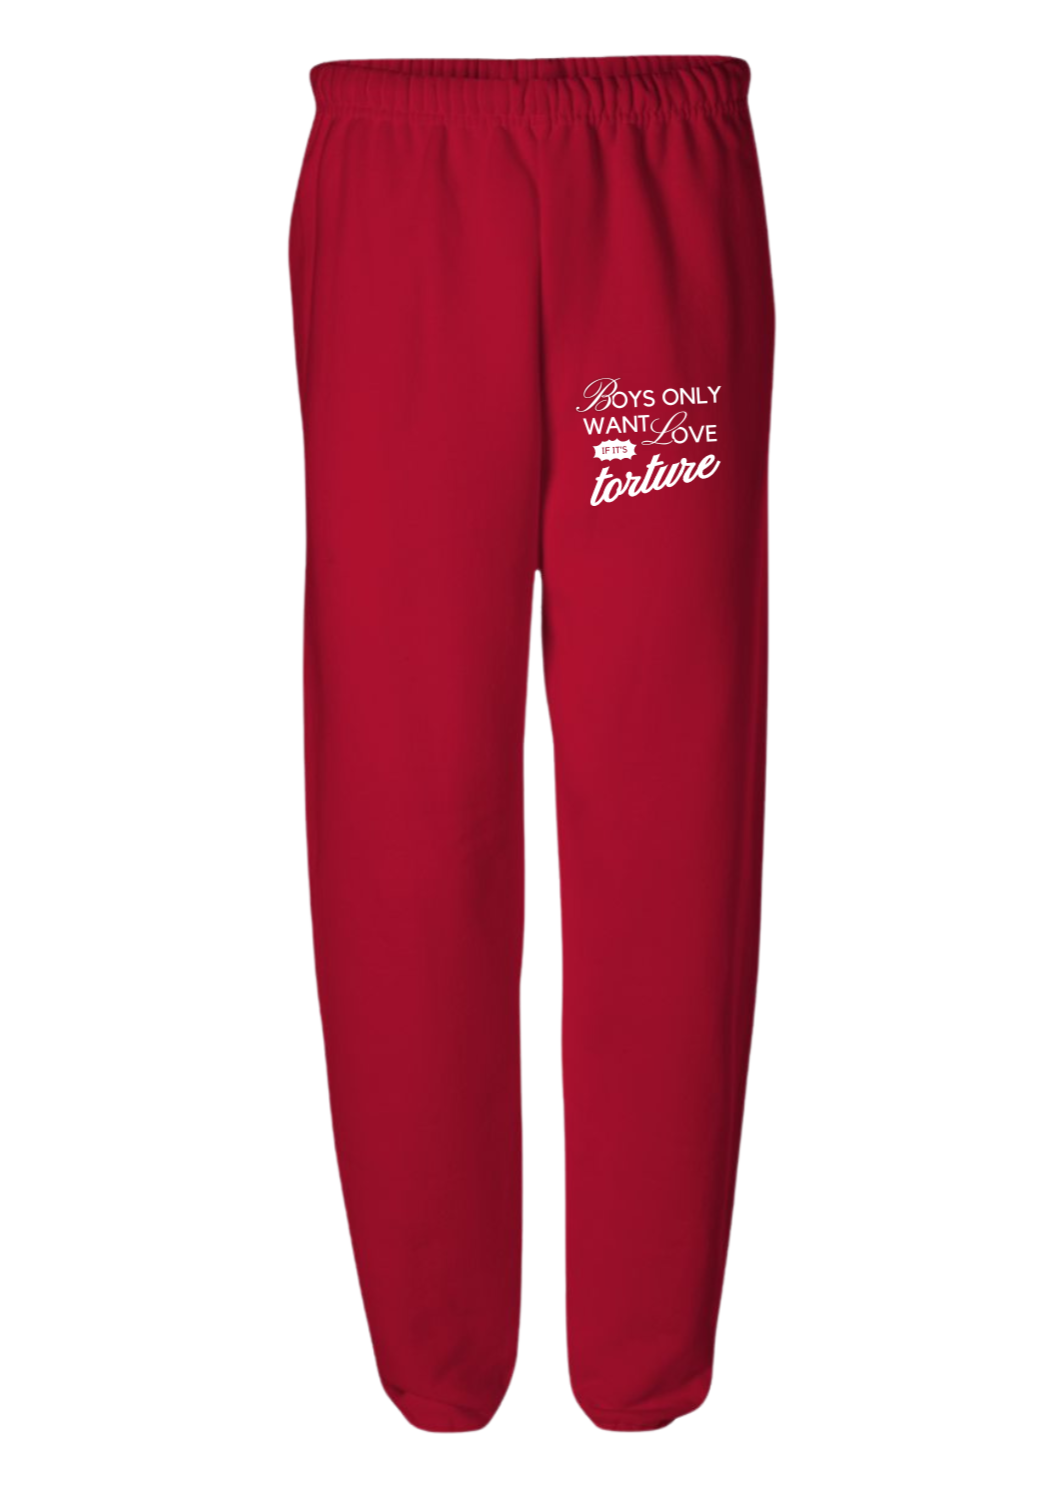 blank space jogger style sweatpants